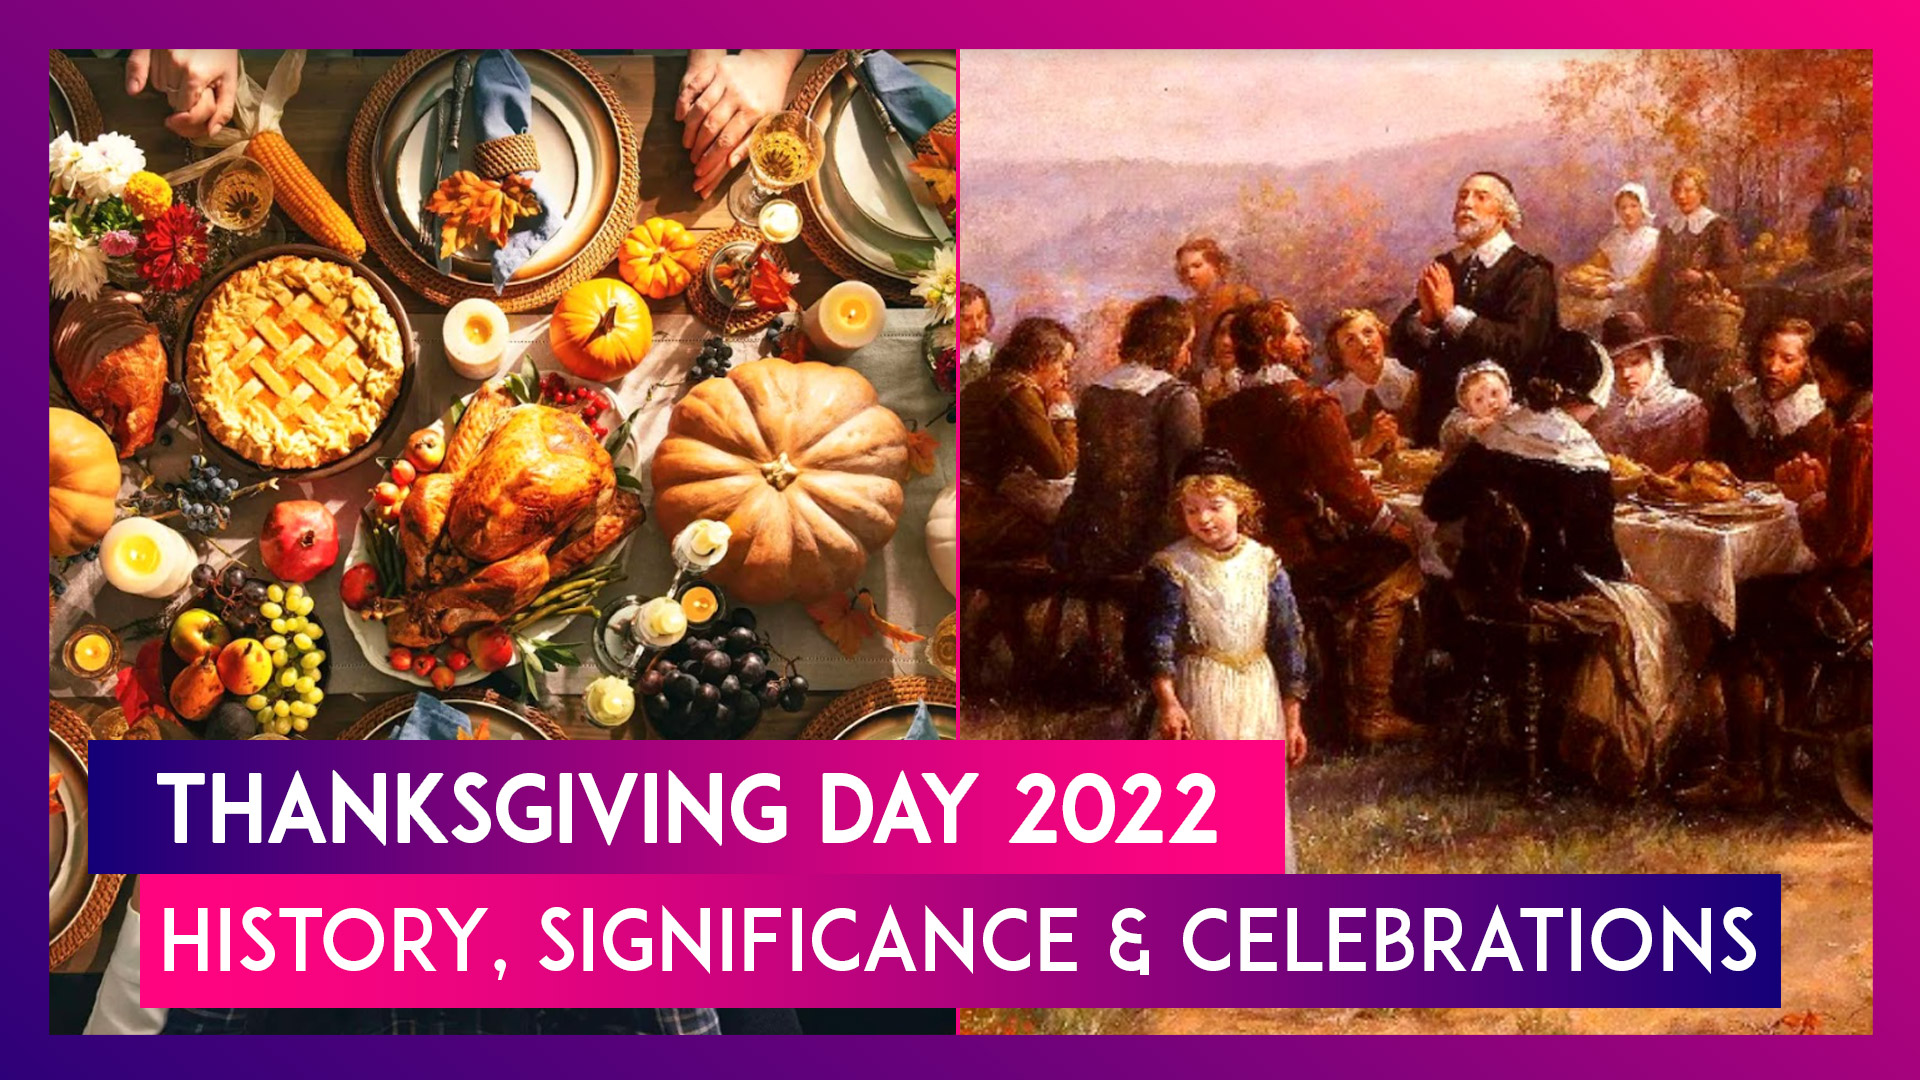 Thanksgiving Day 2022: Its significance and how it's celebrated